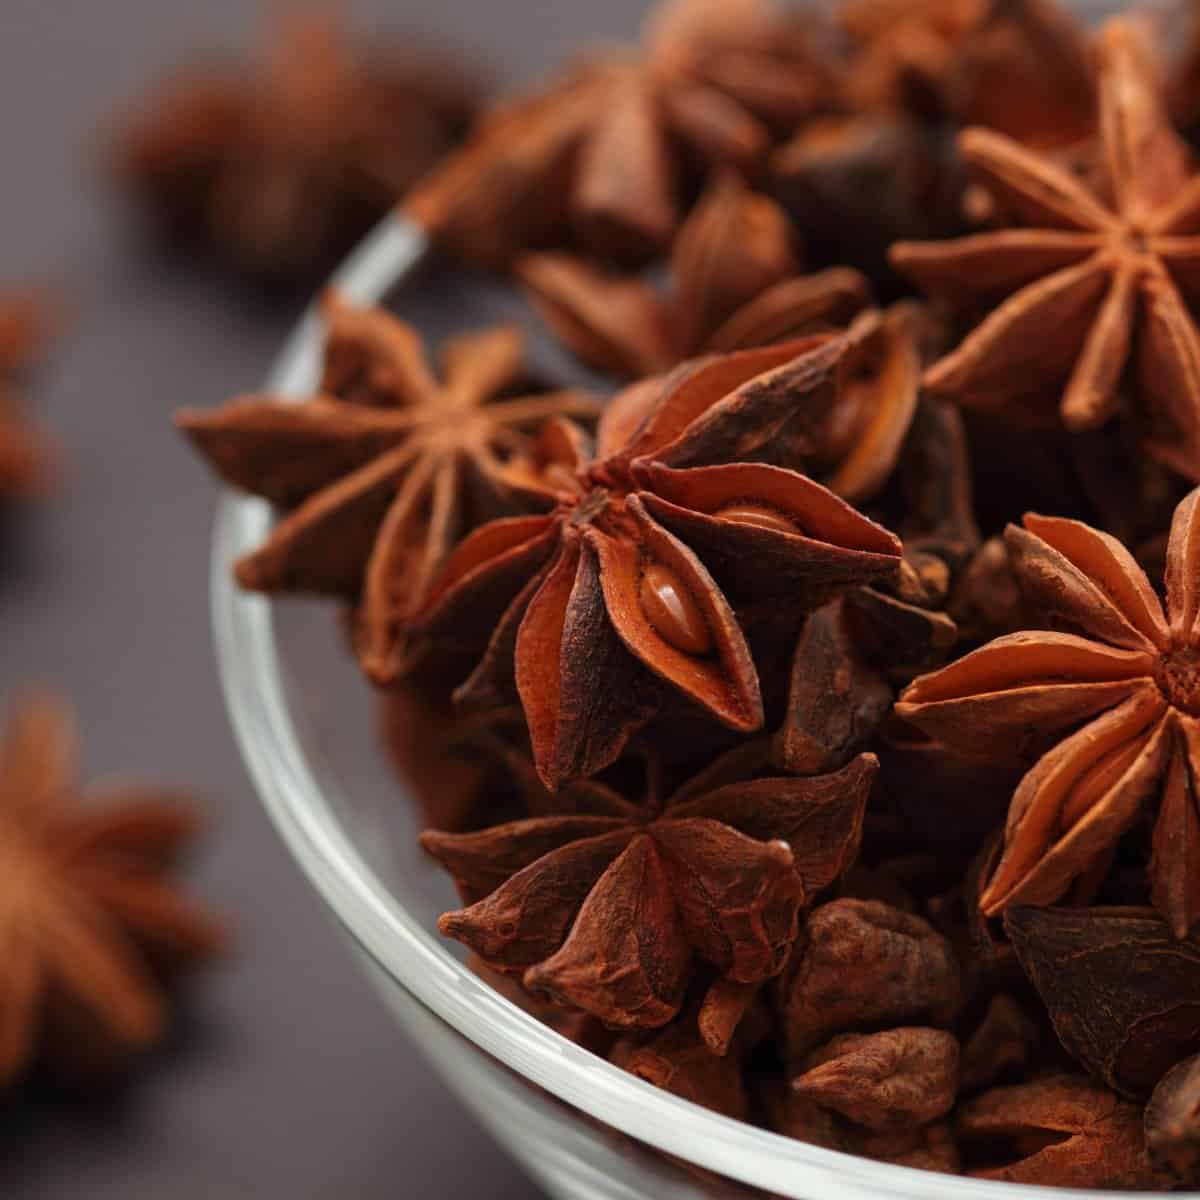 What is star anise